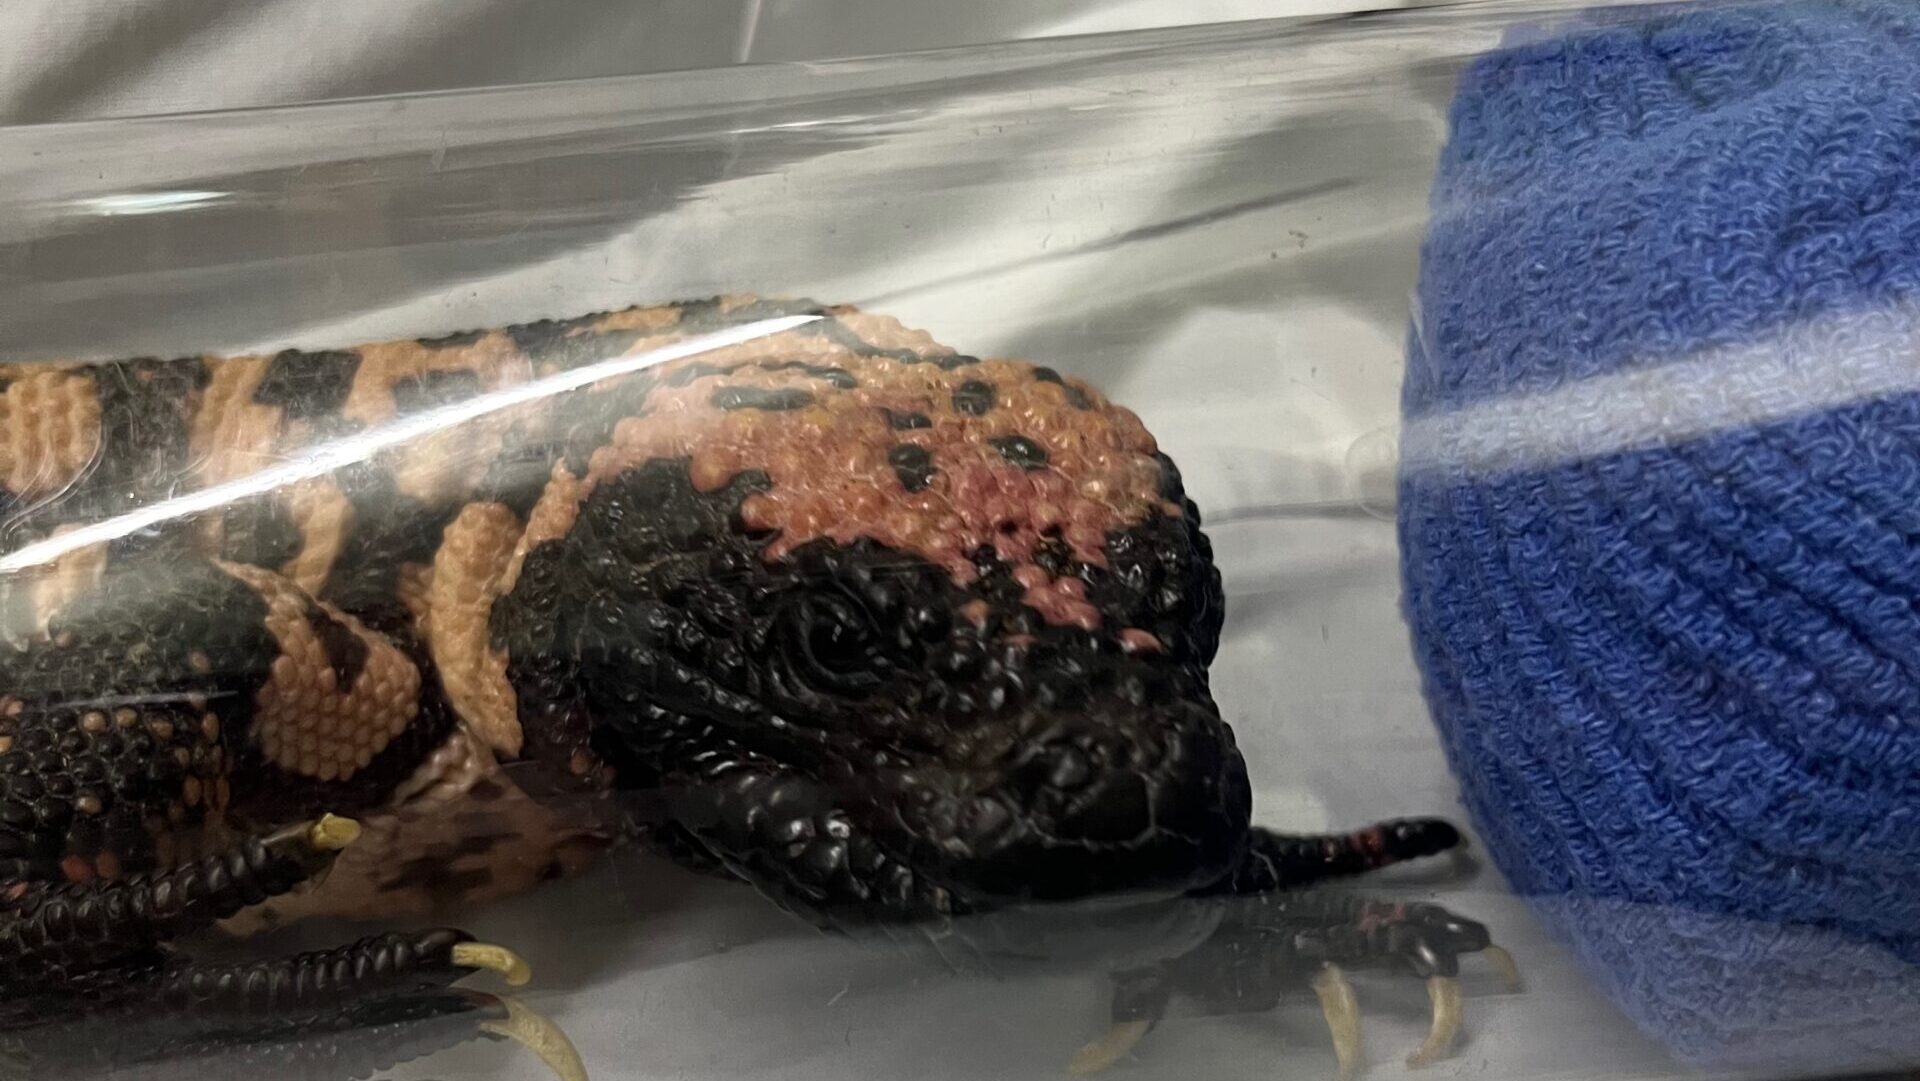 The Gila monster inside the tube for radiographs. This tube is the largest in a set designed to handle venomous snakes. We were able to take radiographs from all angles without sedating by utilizing this equipment.